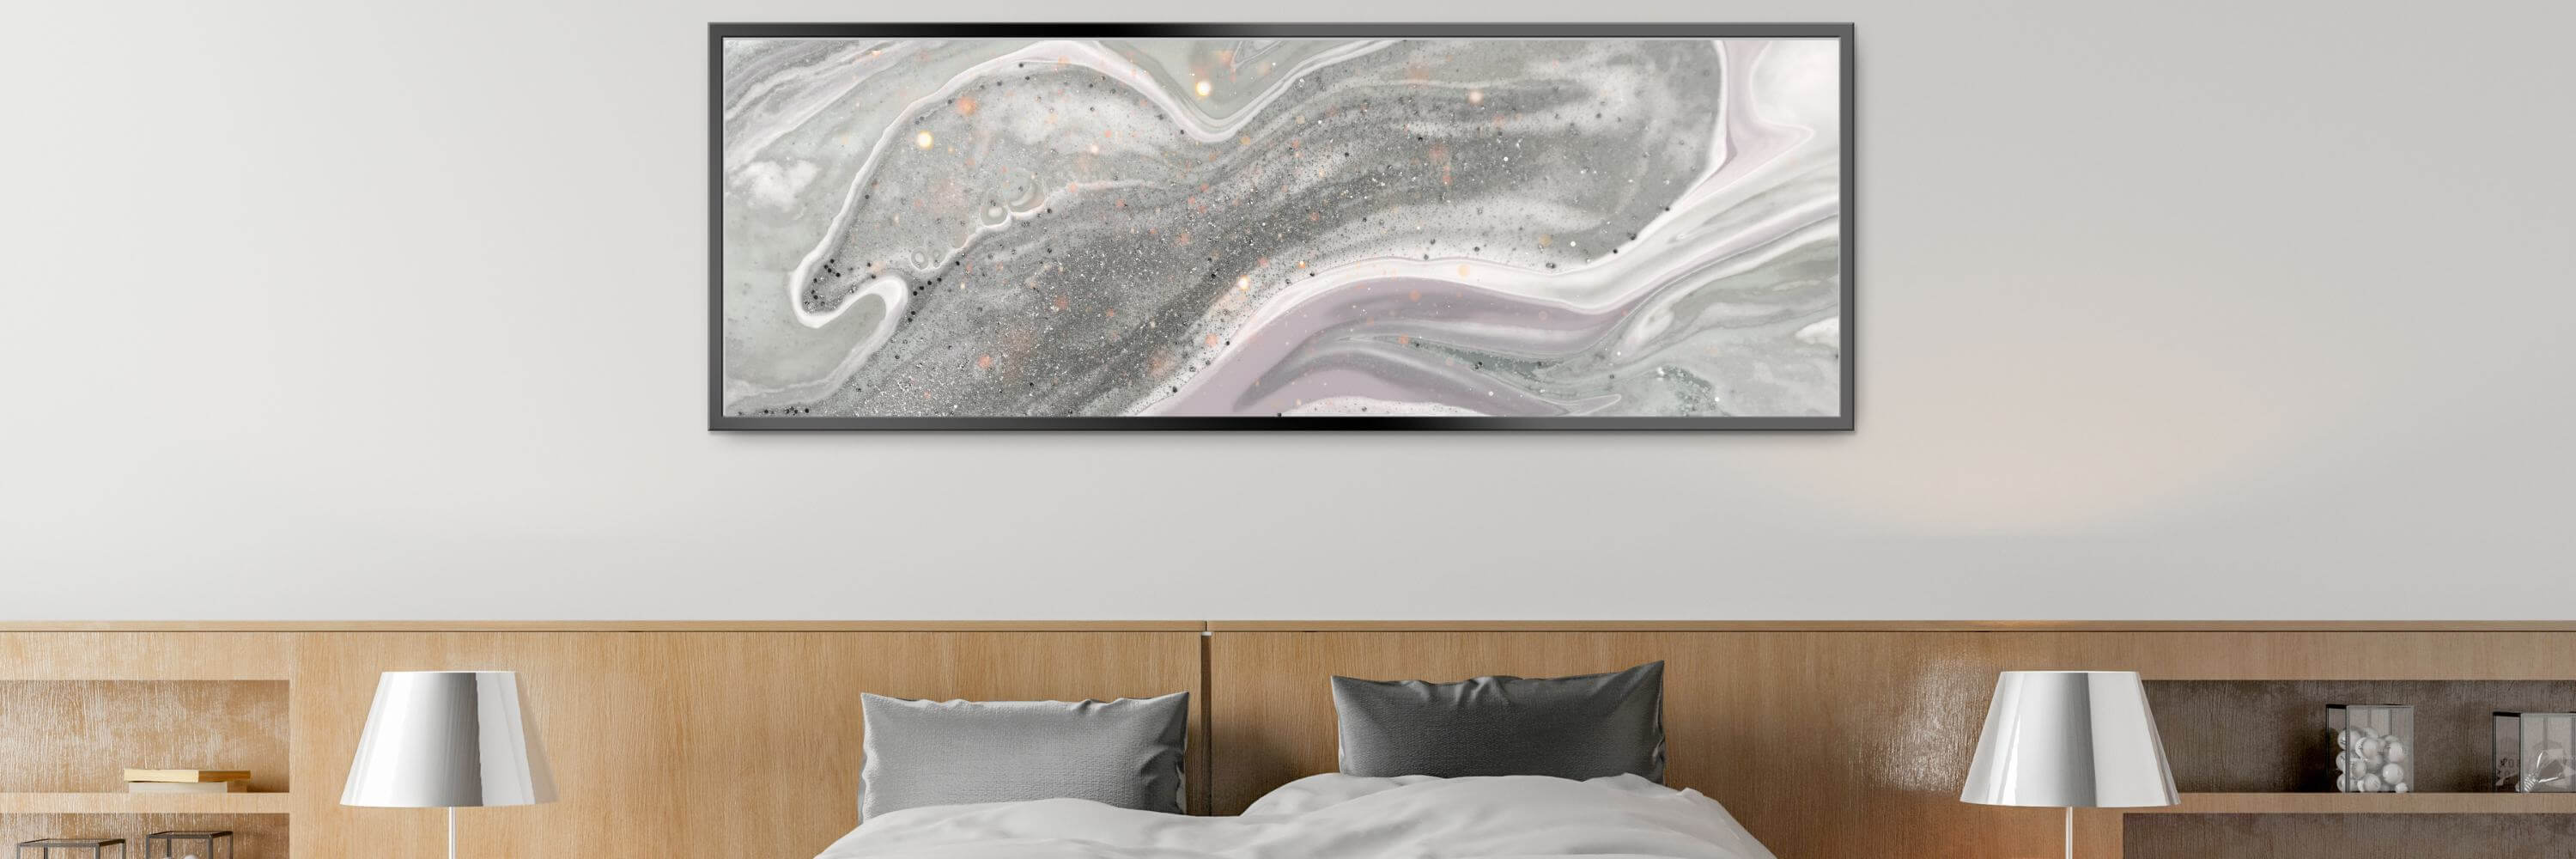 Silver shimmery wall art above the bed